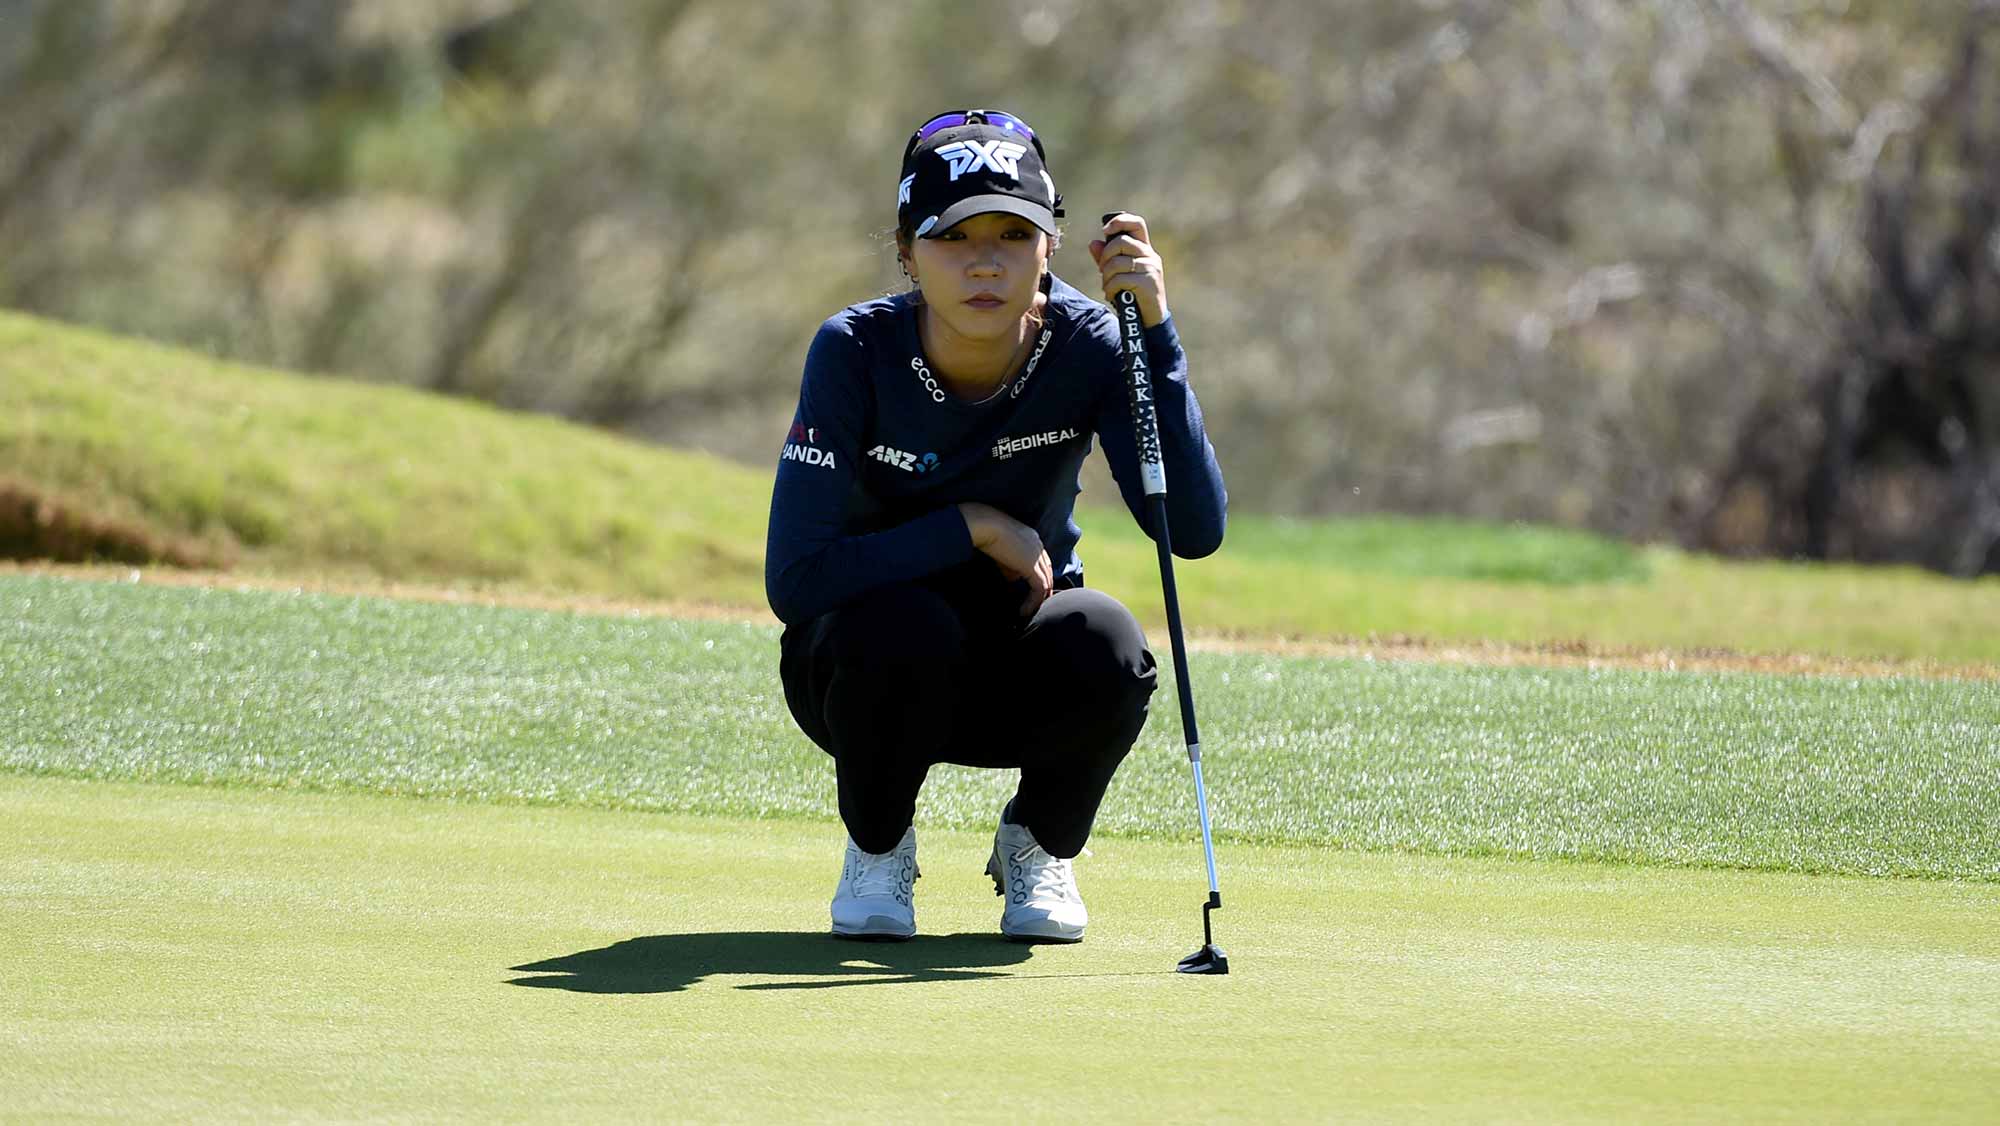 Lydia Ko of New Zealand lines up a putt on the third hole during the second round of the Bank Of Hope Founders Cup at the Wildfire Golf Club on March 22, 2019 in Phoenix, Arizona